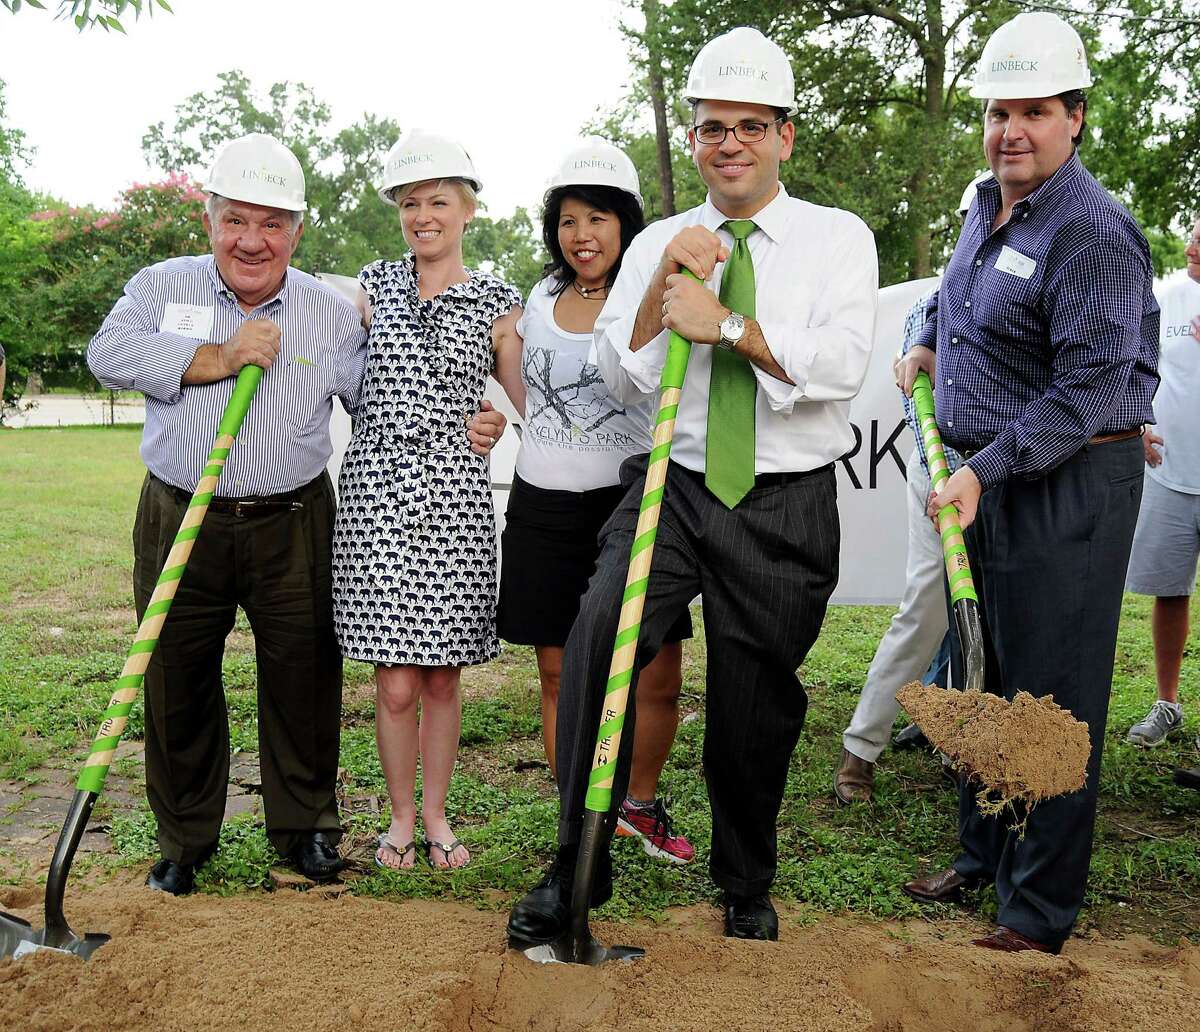 Bellaire City Councilman Jim Avioli, left, state Rep. Sarah Davis, R-Houston, Evelyn's Park Conservancy President Patricia Ritter and Bellaire council members Andrew Friedberg and Roman Reed break ground June 18 for Evelyn's Park in Bellaire. The city and conservancy are ironing at details on what each should pay during the first phase of construction.